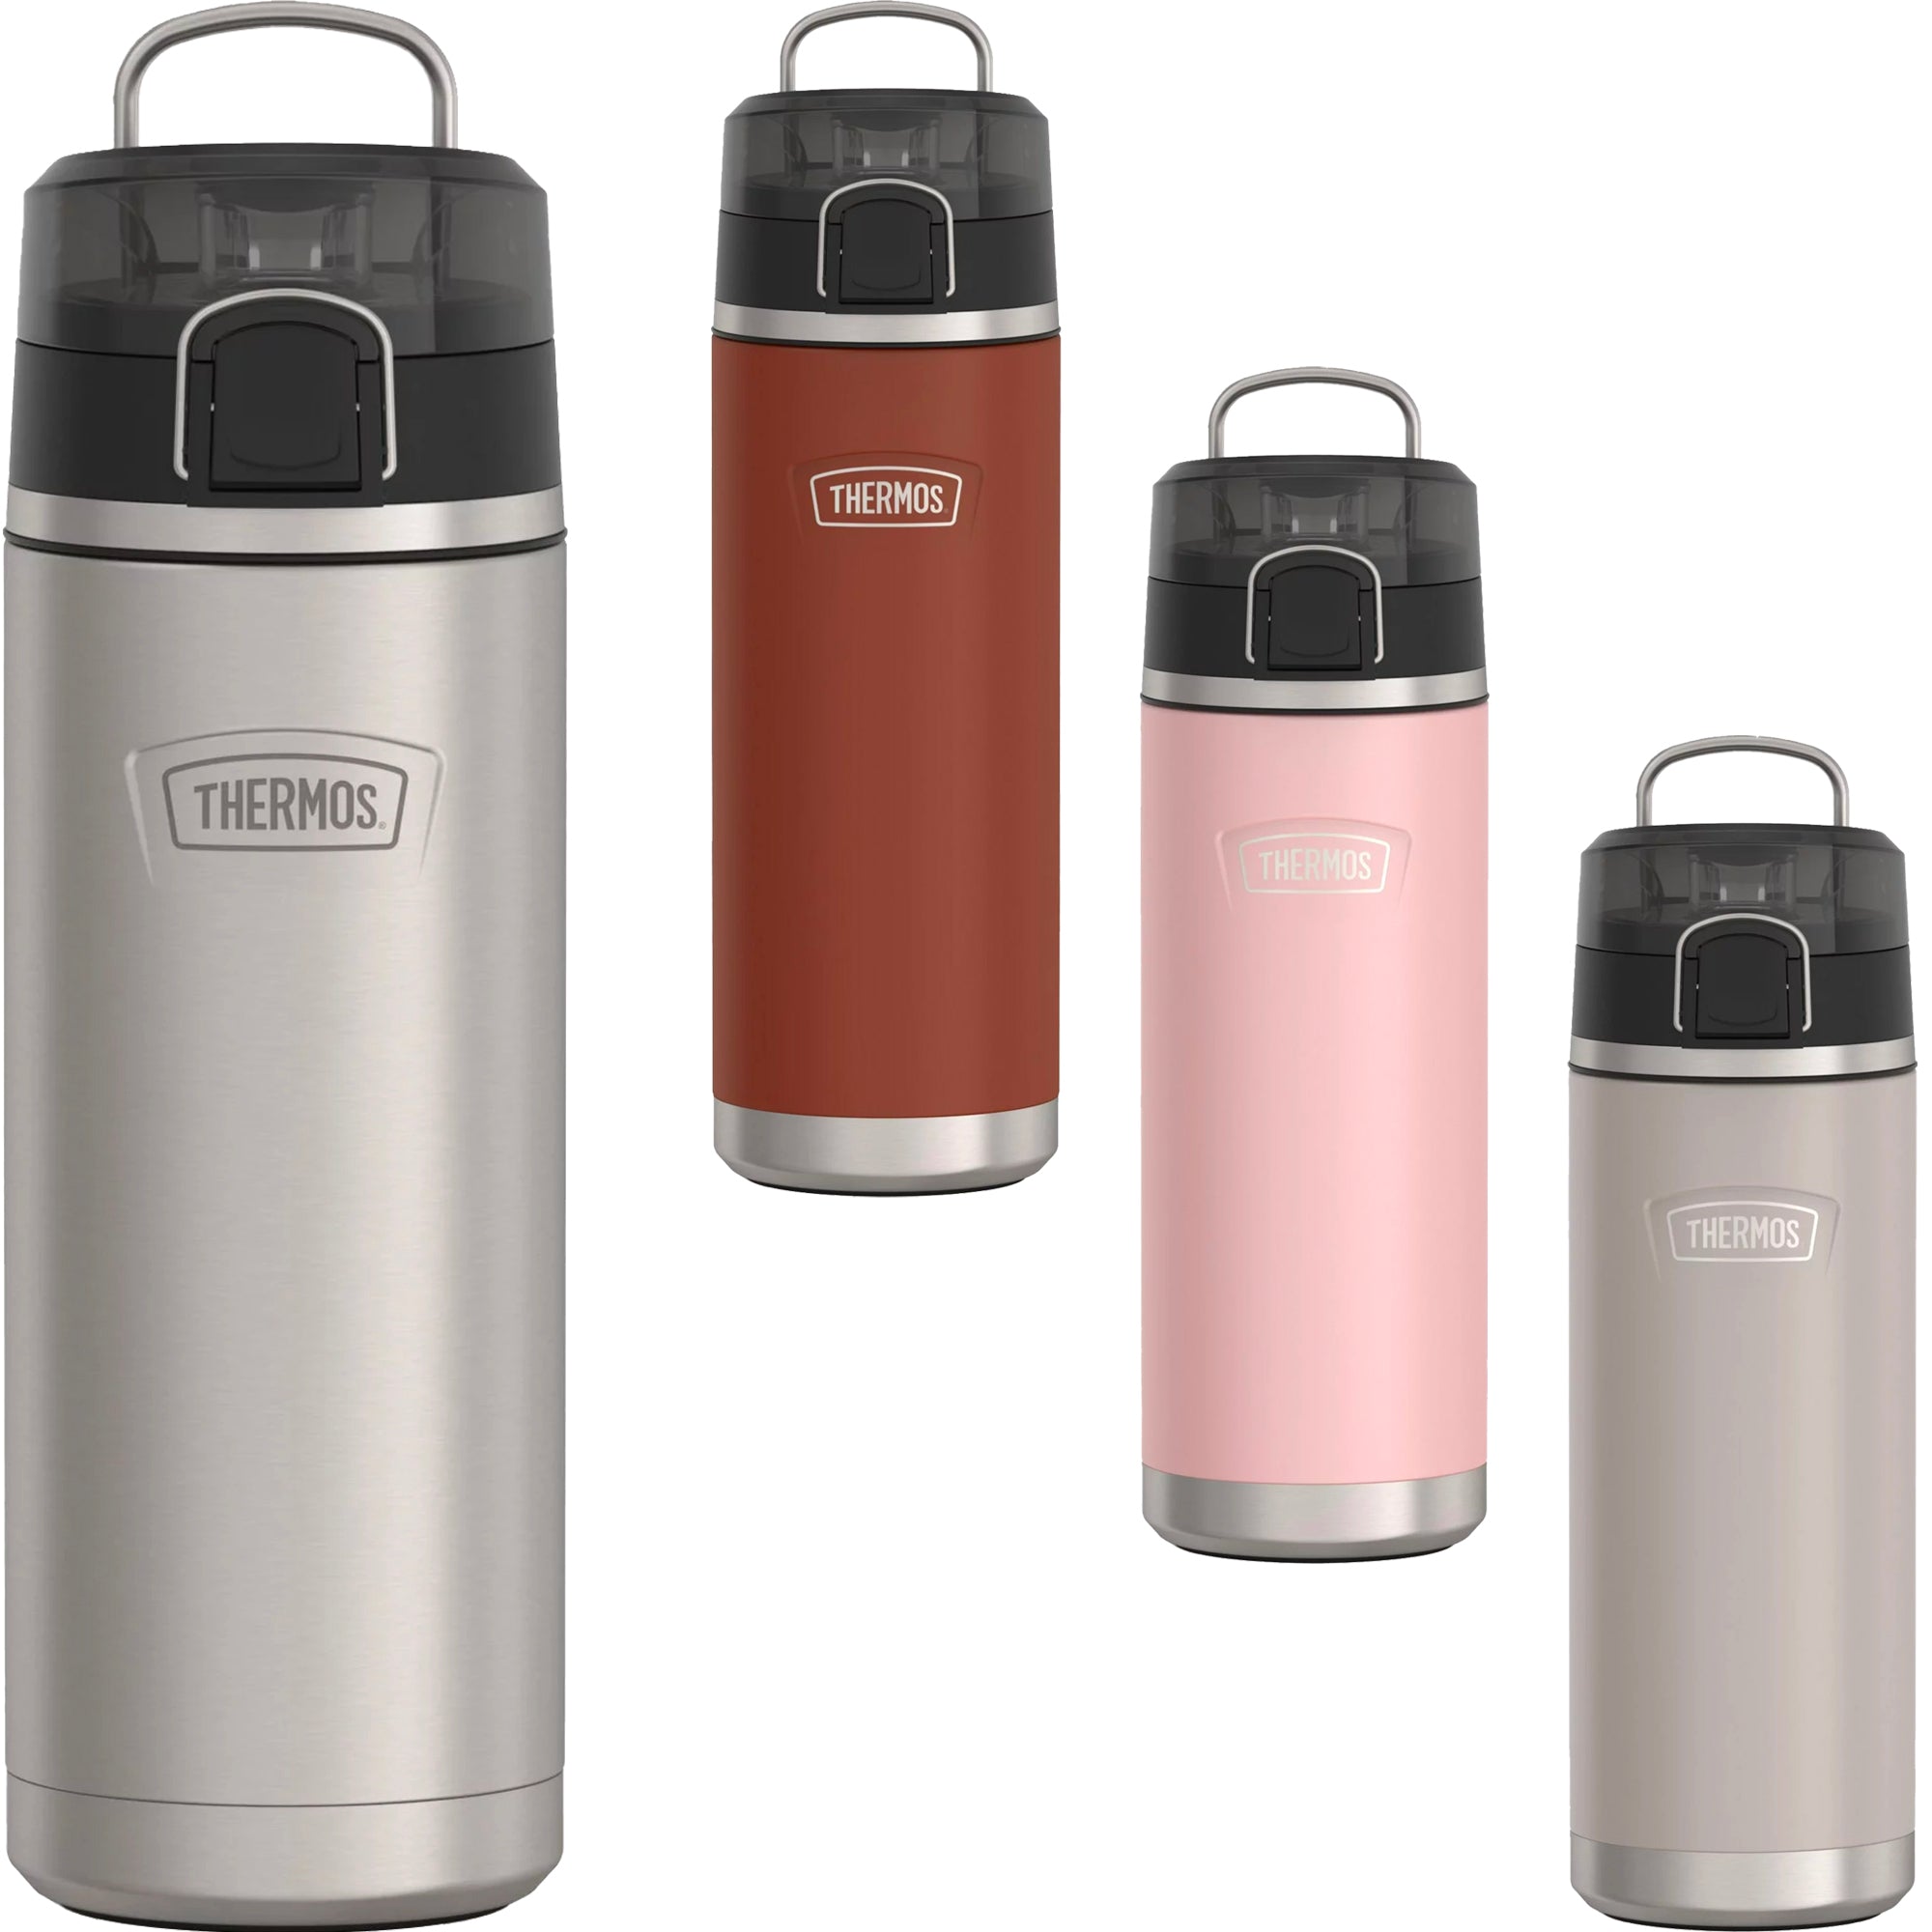 Thermos 24oz Stainless Steel Hydration Bottle with Spout Glacier